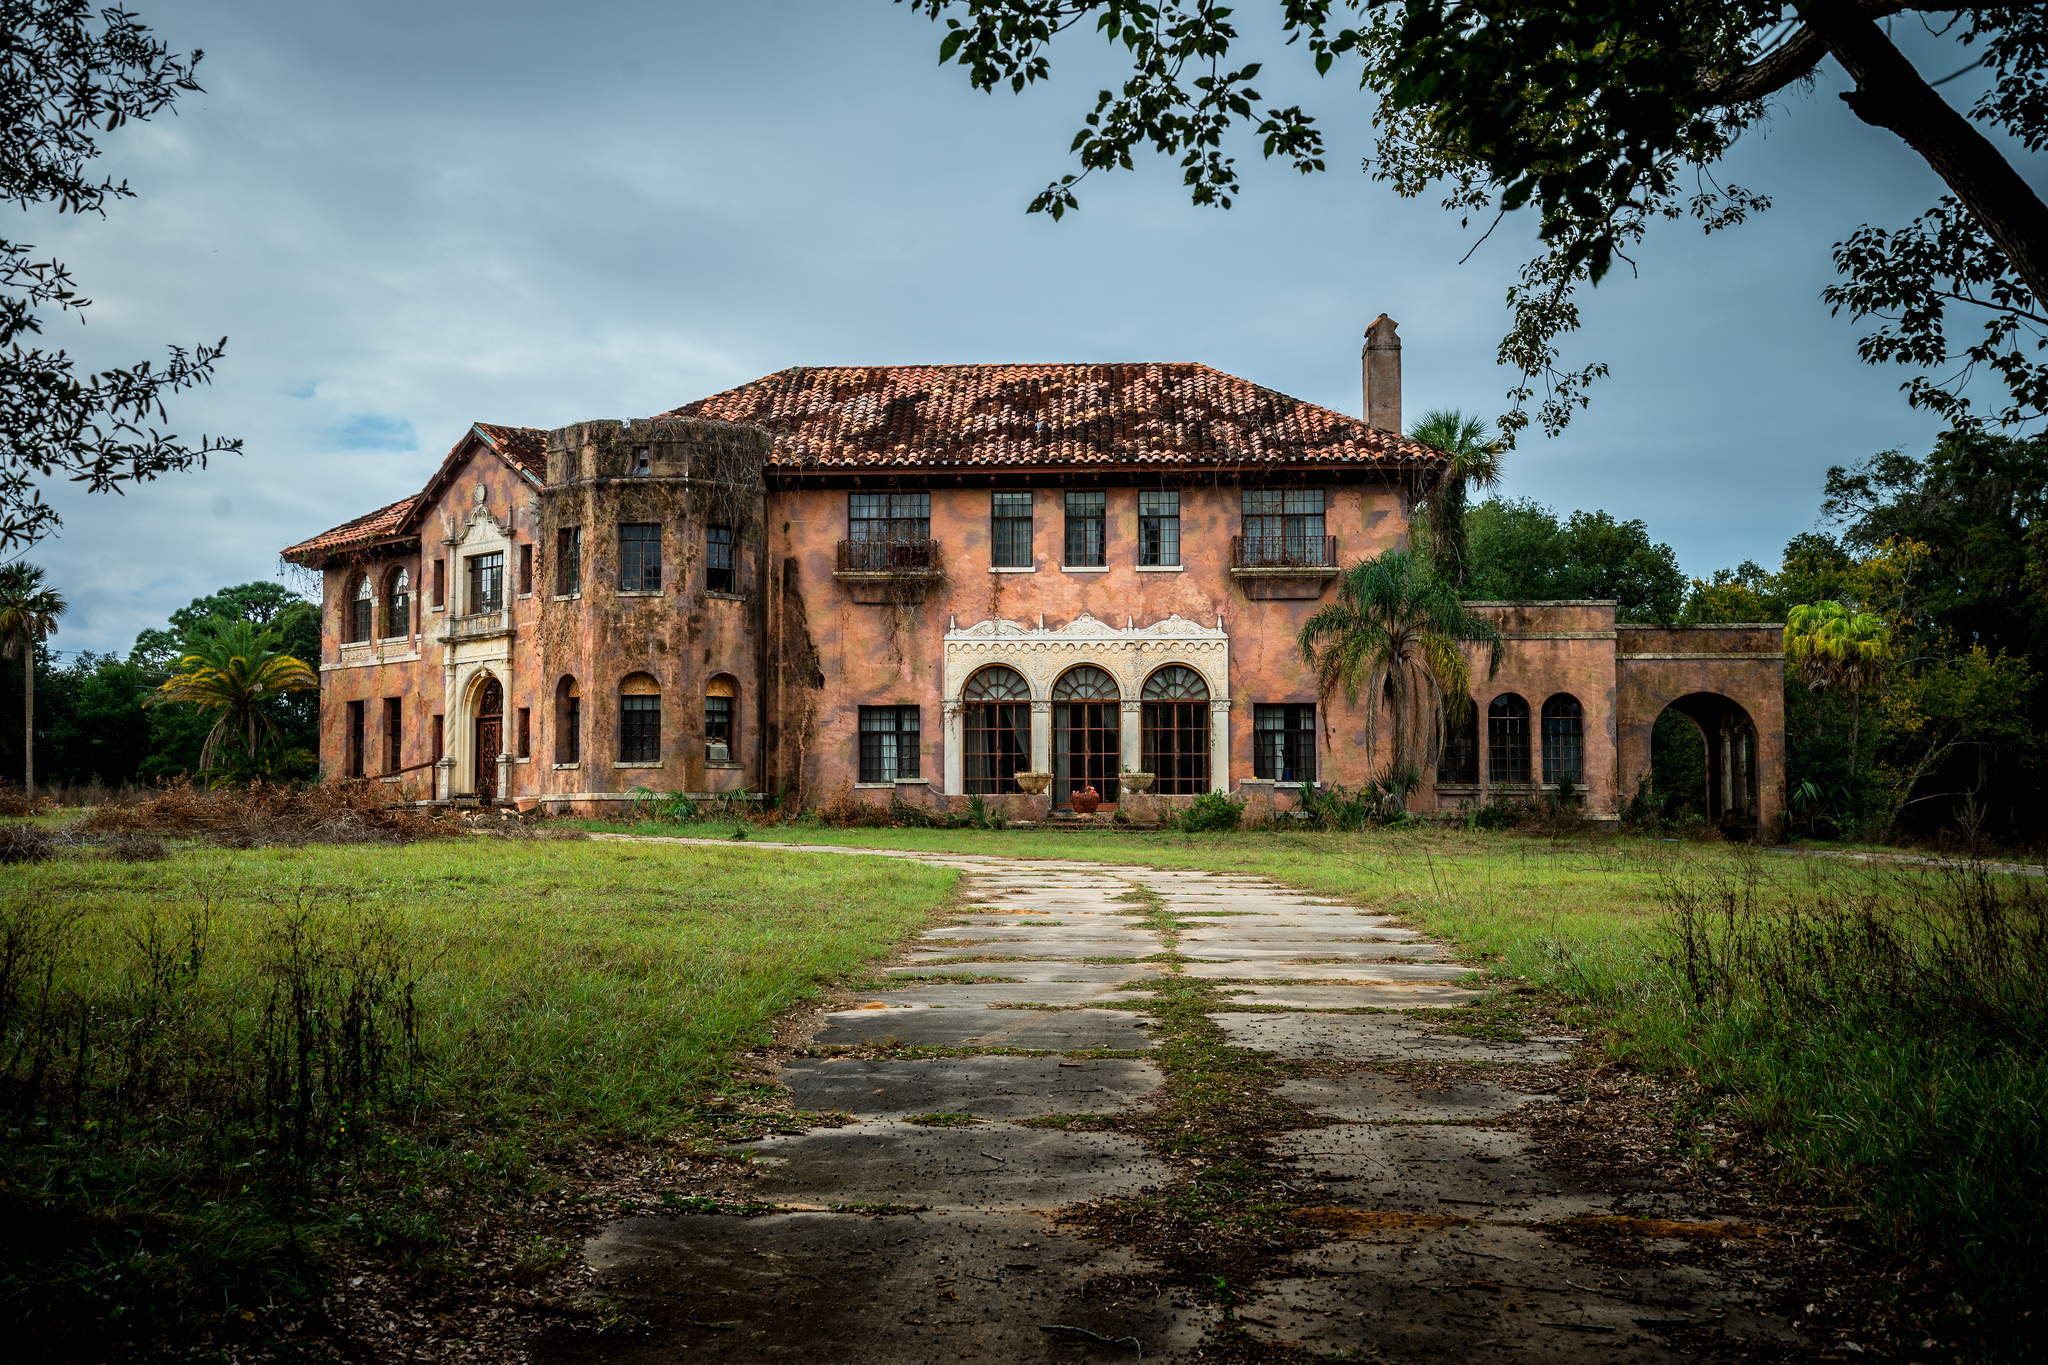 There's A Creepy But Beautiful Abandoned Mansion In Florida